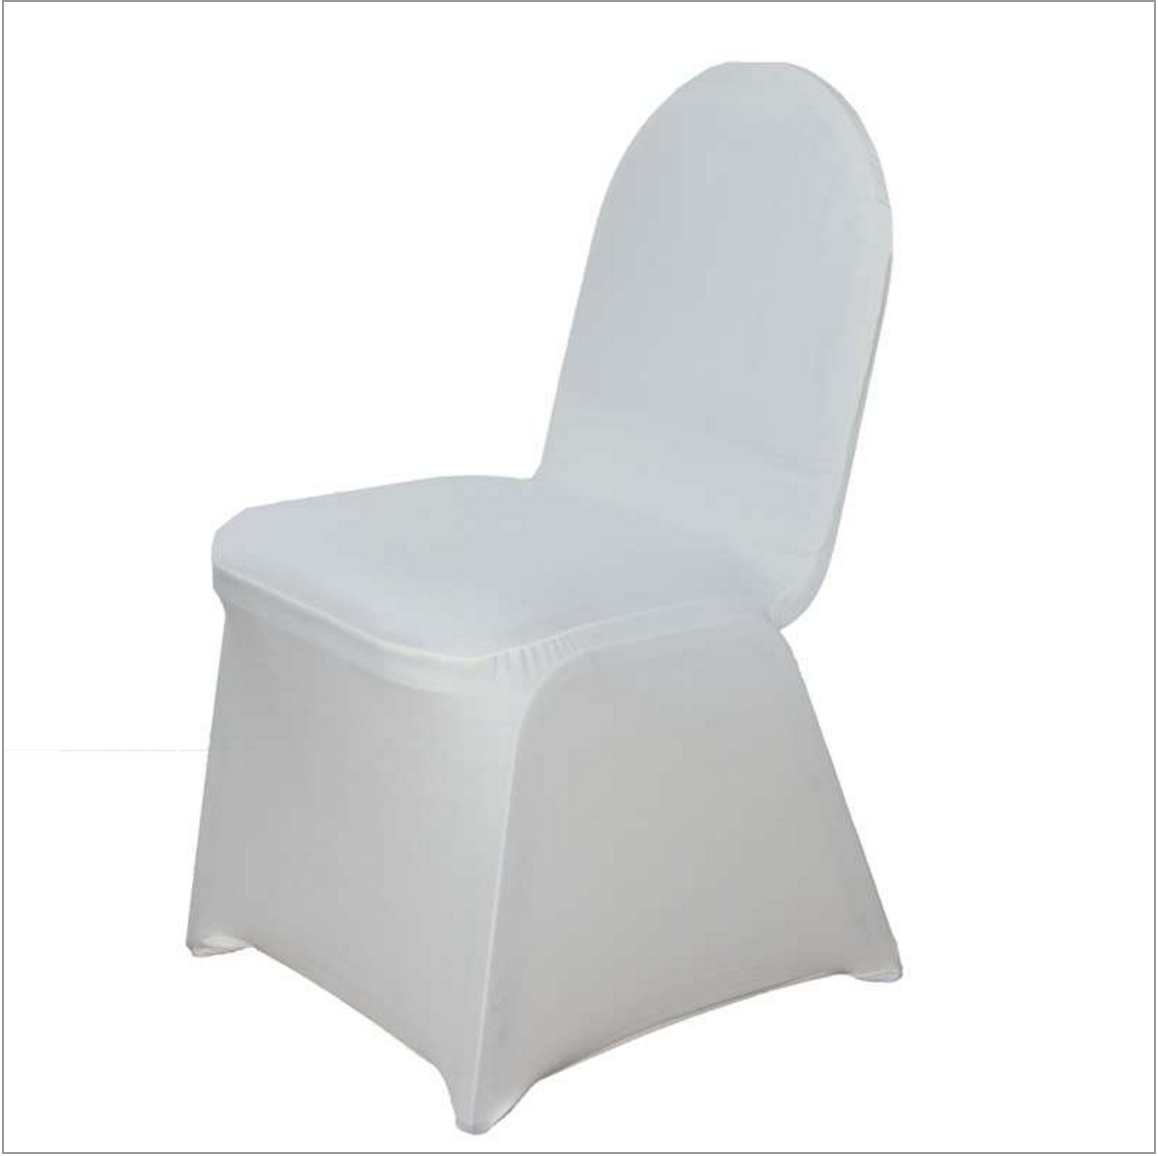 Beige / Ivory Form Fitting Stretch Fabric Full Chair Cover - PaperLanternStore.com - Paper Lanterns, Decor, Party Lights &amp; More